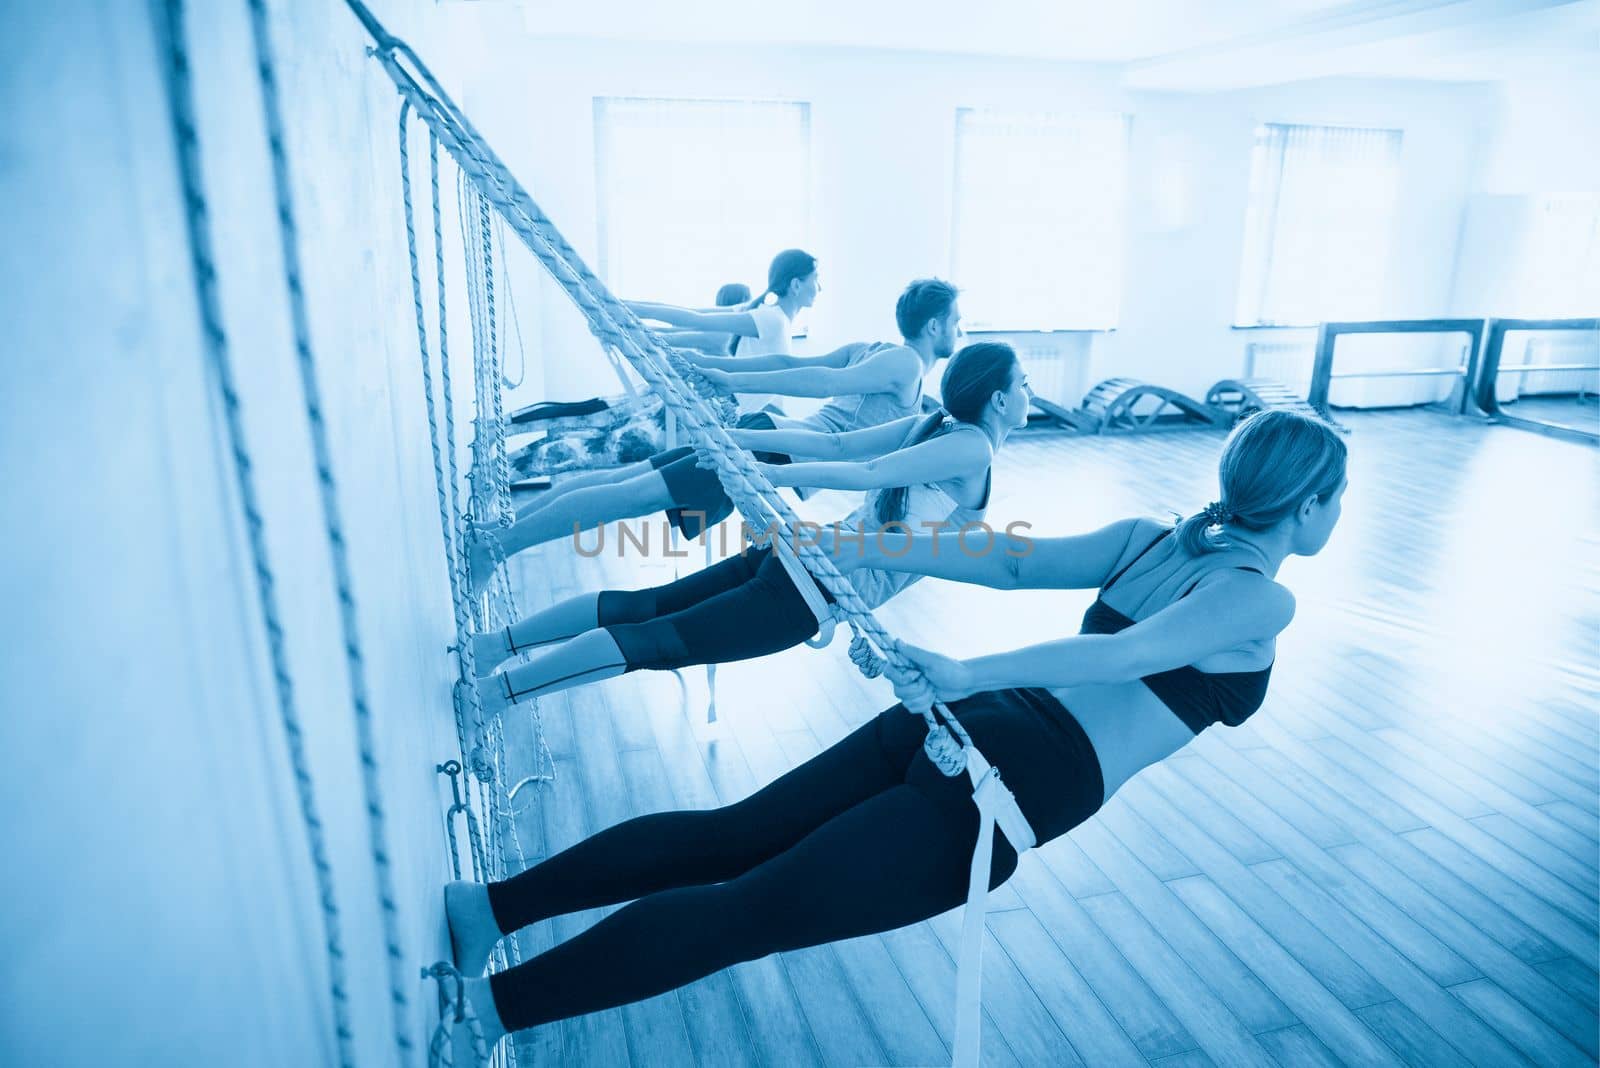 women hanging on ropes upside down practicing yoga on ropes stretching in gym. Fit and wellness lifestyle.